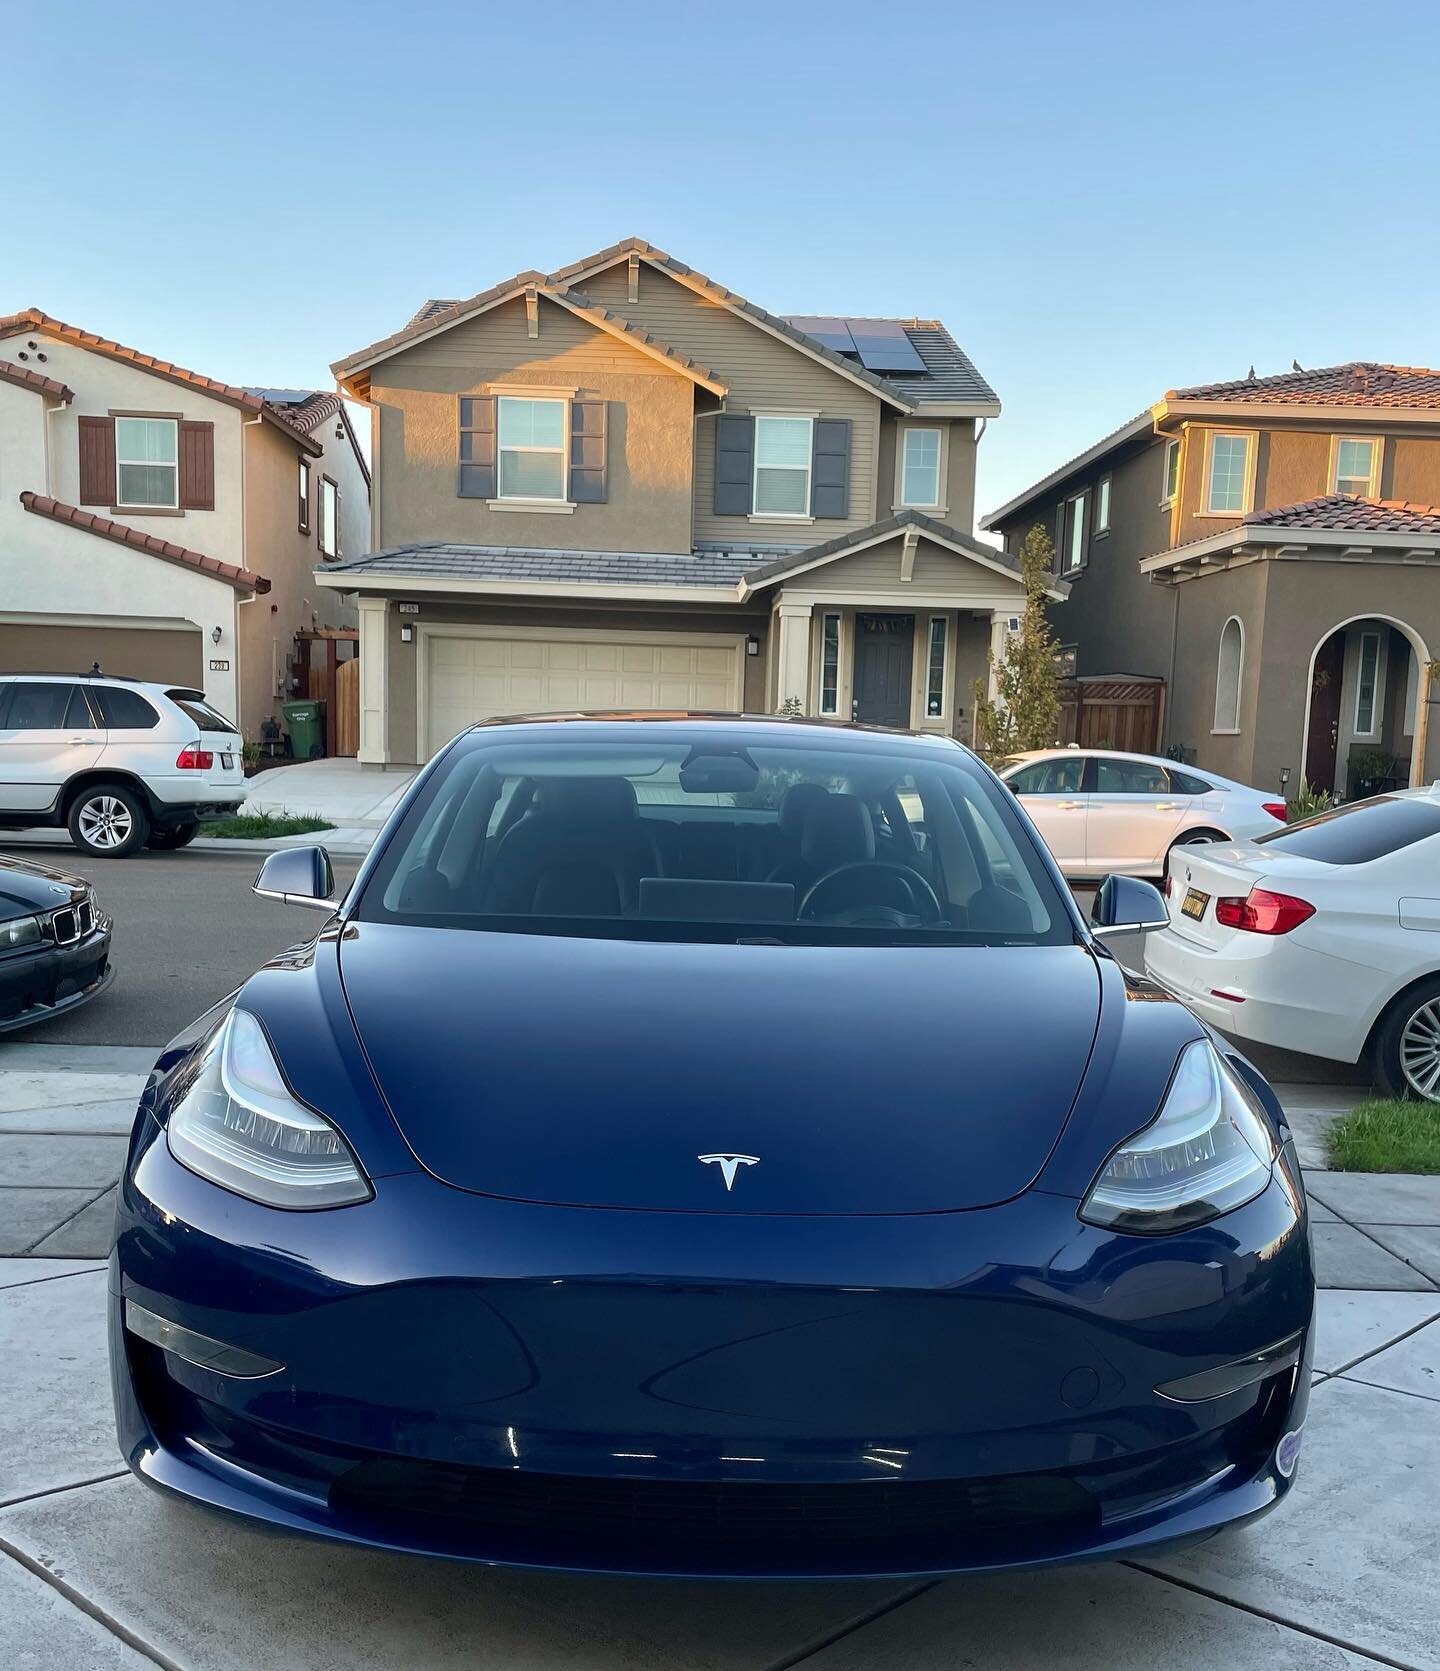 Tesla Model 3 in for our Platinum Package! This car came out amazing once we finished it up. Swipe right to enjoy some Before &amp; After shots! 
&thinsp;&thinsp;&thinsp;&thinsp;&thinsp;&thinsp;&thinsp;&thinsp;&thinsp;&thinsp;&thinsp;&thinsp;&thinsp;